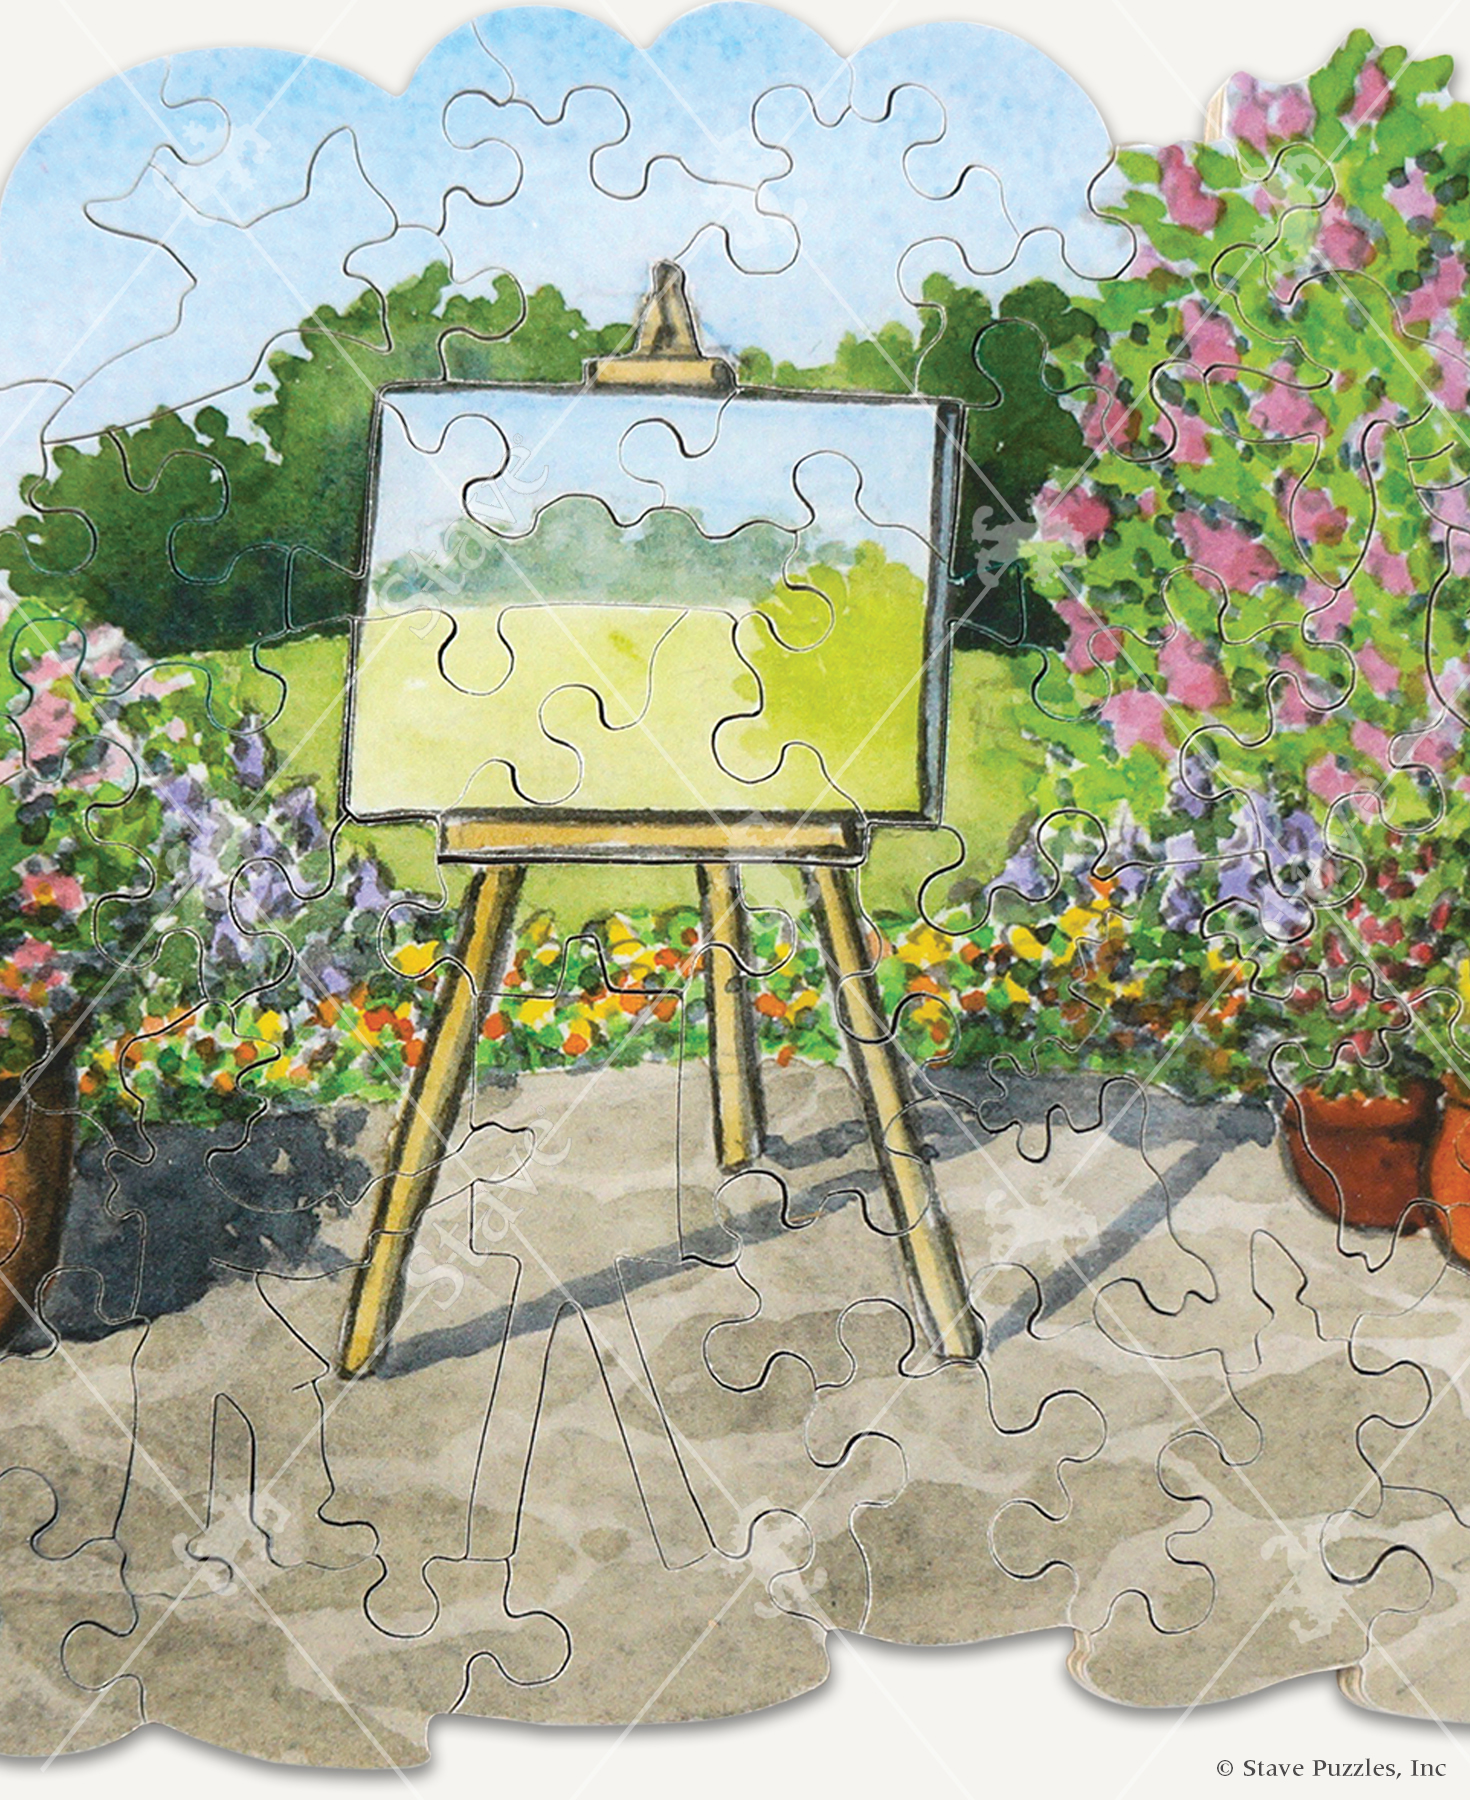 Close up of Picture This! wooden jigsaw puzzles displays an artist easel and canvas standing on a stone pathway surrounded by colorful flower bushes. The easel is facing a field with bushes in the background that are depicted in the painting on the canvas.